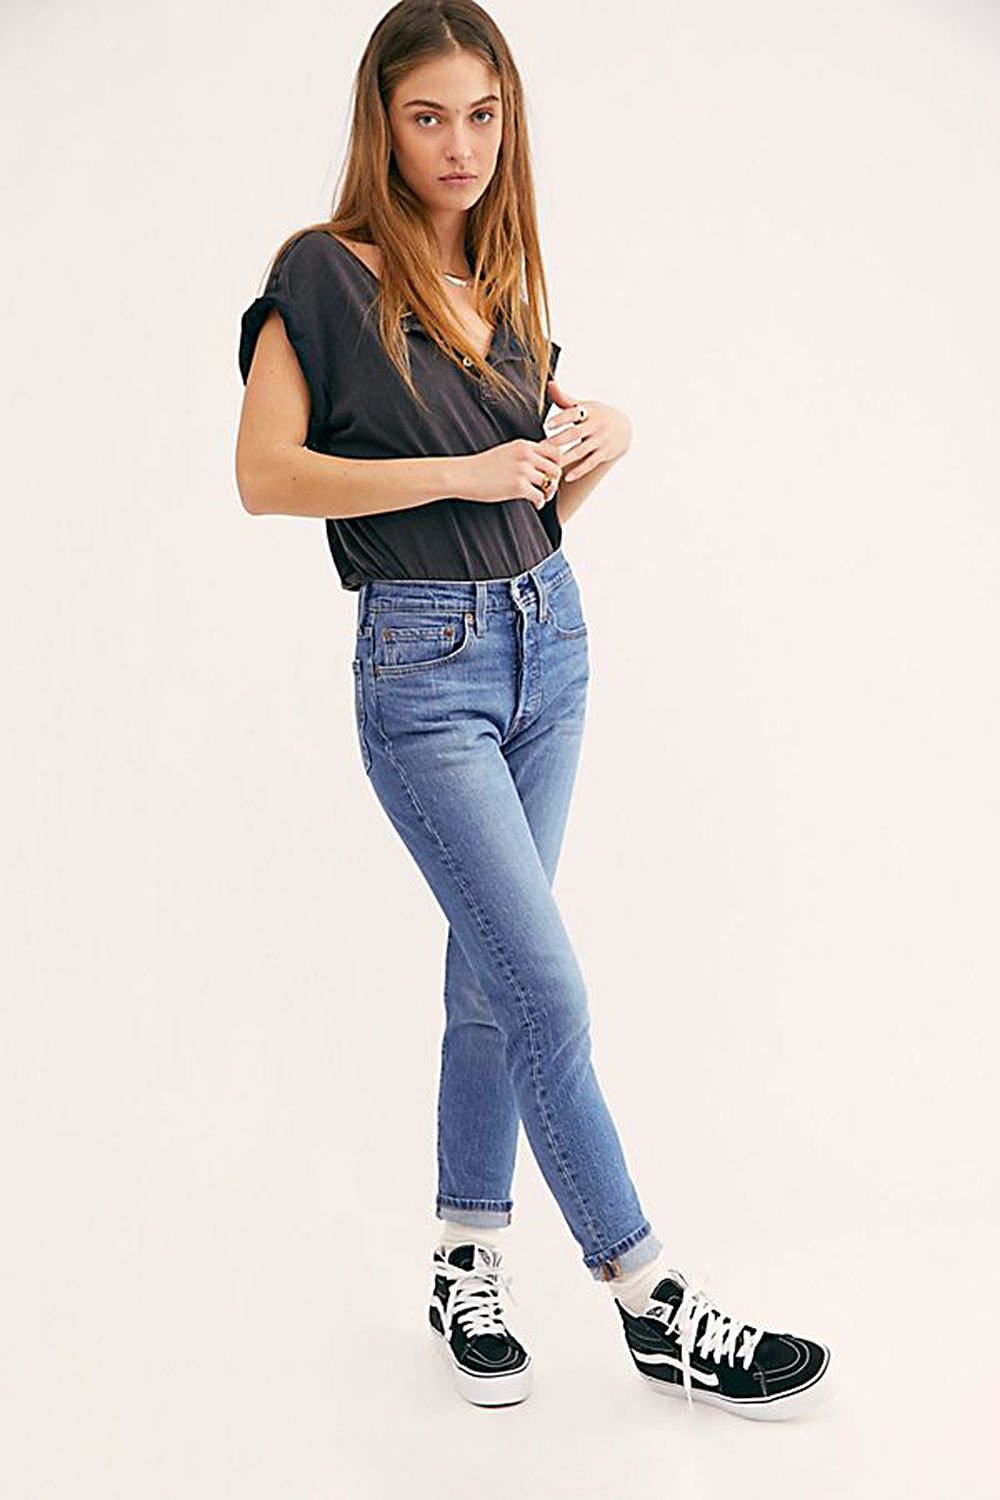 Free People’s Top-Selling Jeans Are $50 Today Only | PEOPLE.com